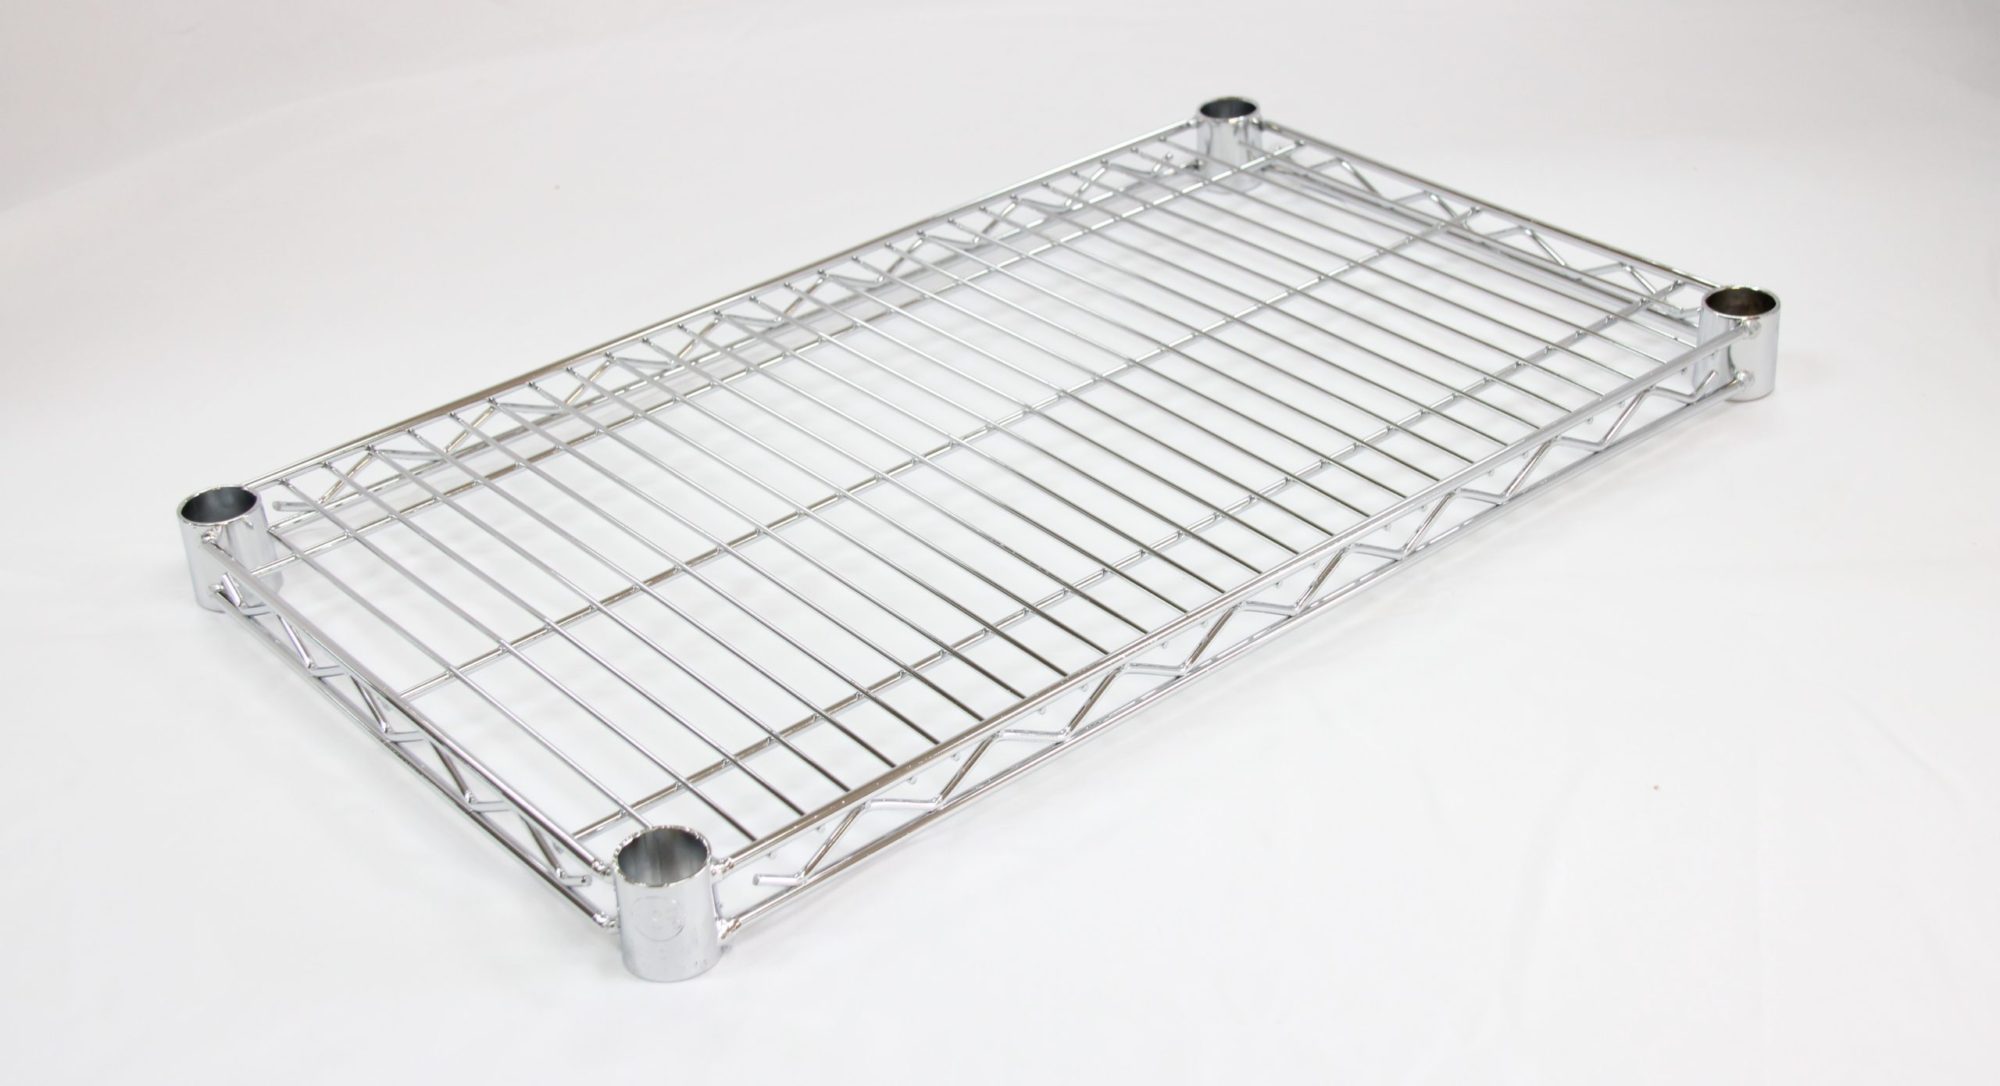 Omcan Wire Mesh Shelving 14" x 36" 20100 Chrome 2 Pack-S1436C